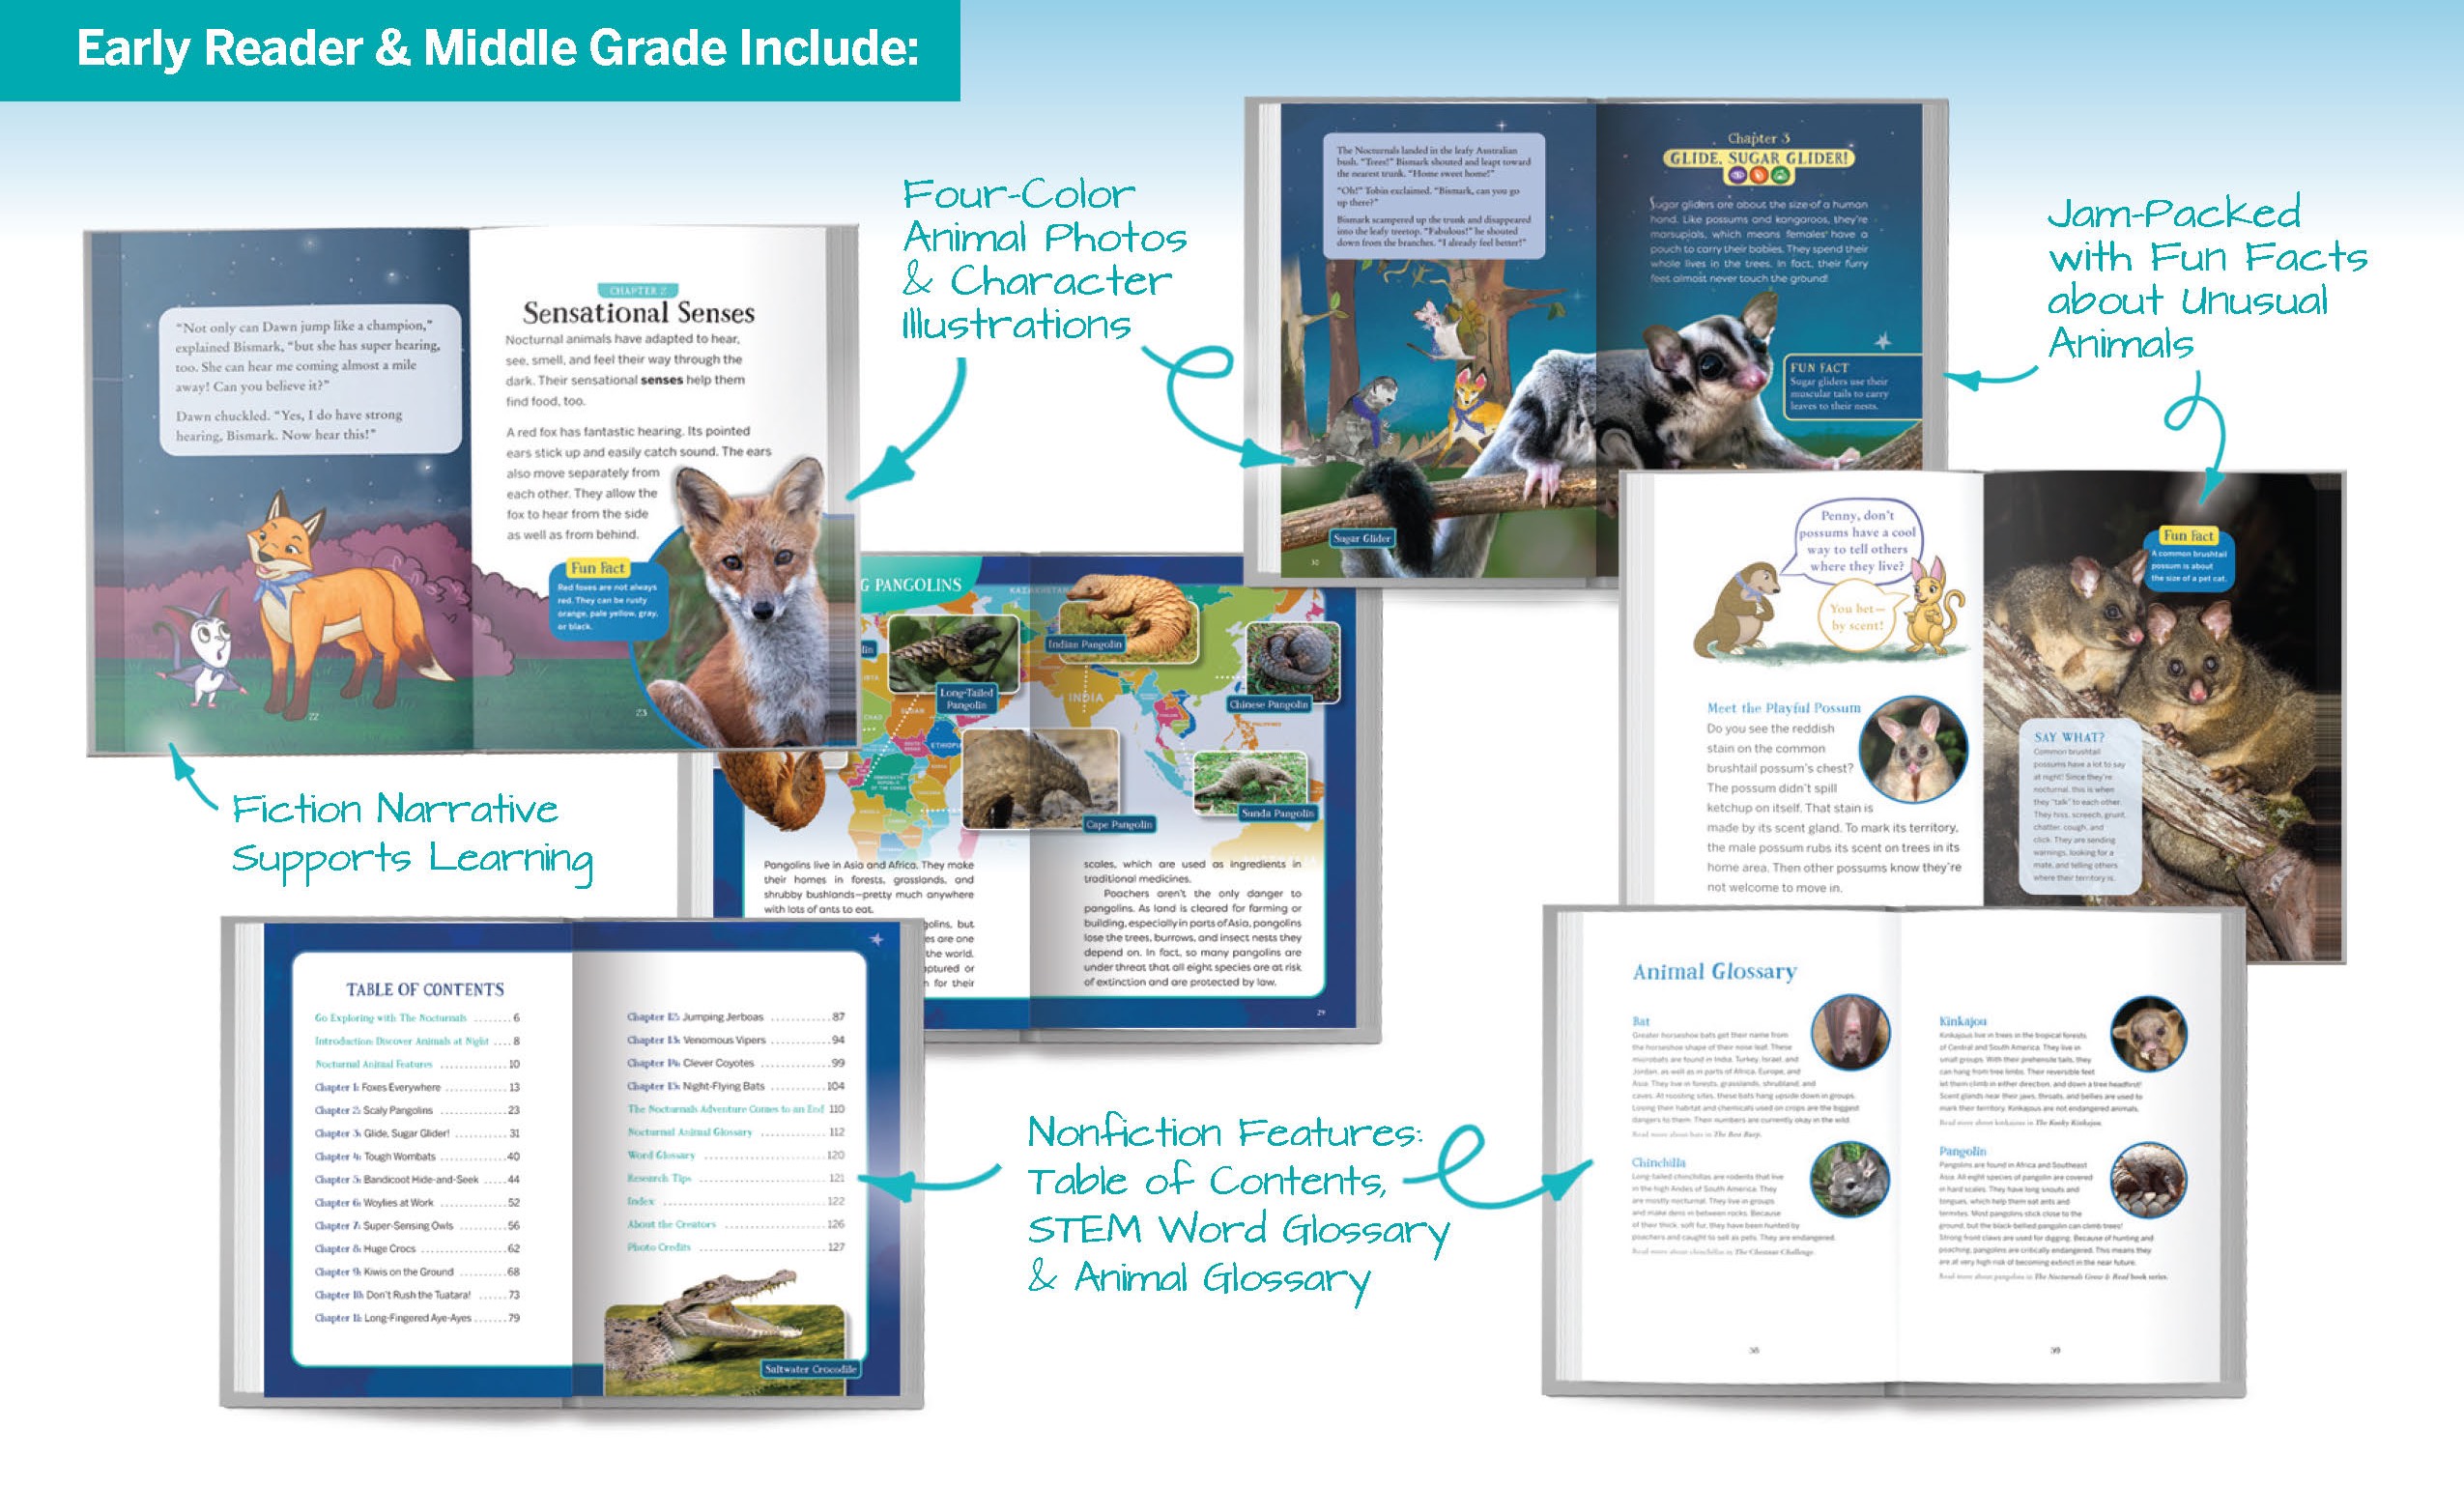 Using arrows to point to certain pages of the book, this graphic shows features of what the early reader & middle grade books include such as the four color animal photos, character illustrations, and fun facts about unusual animals.